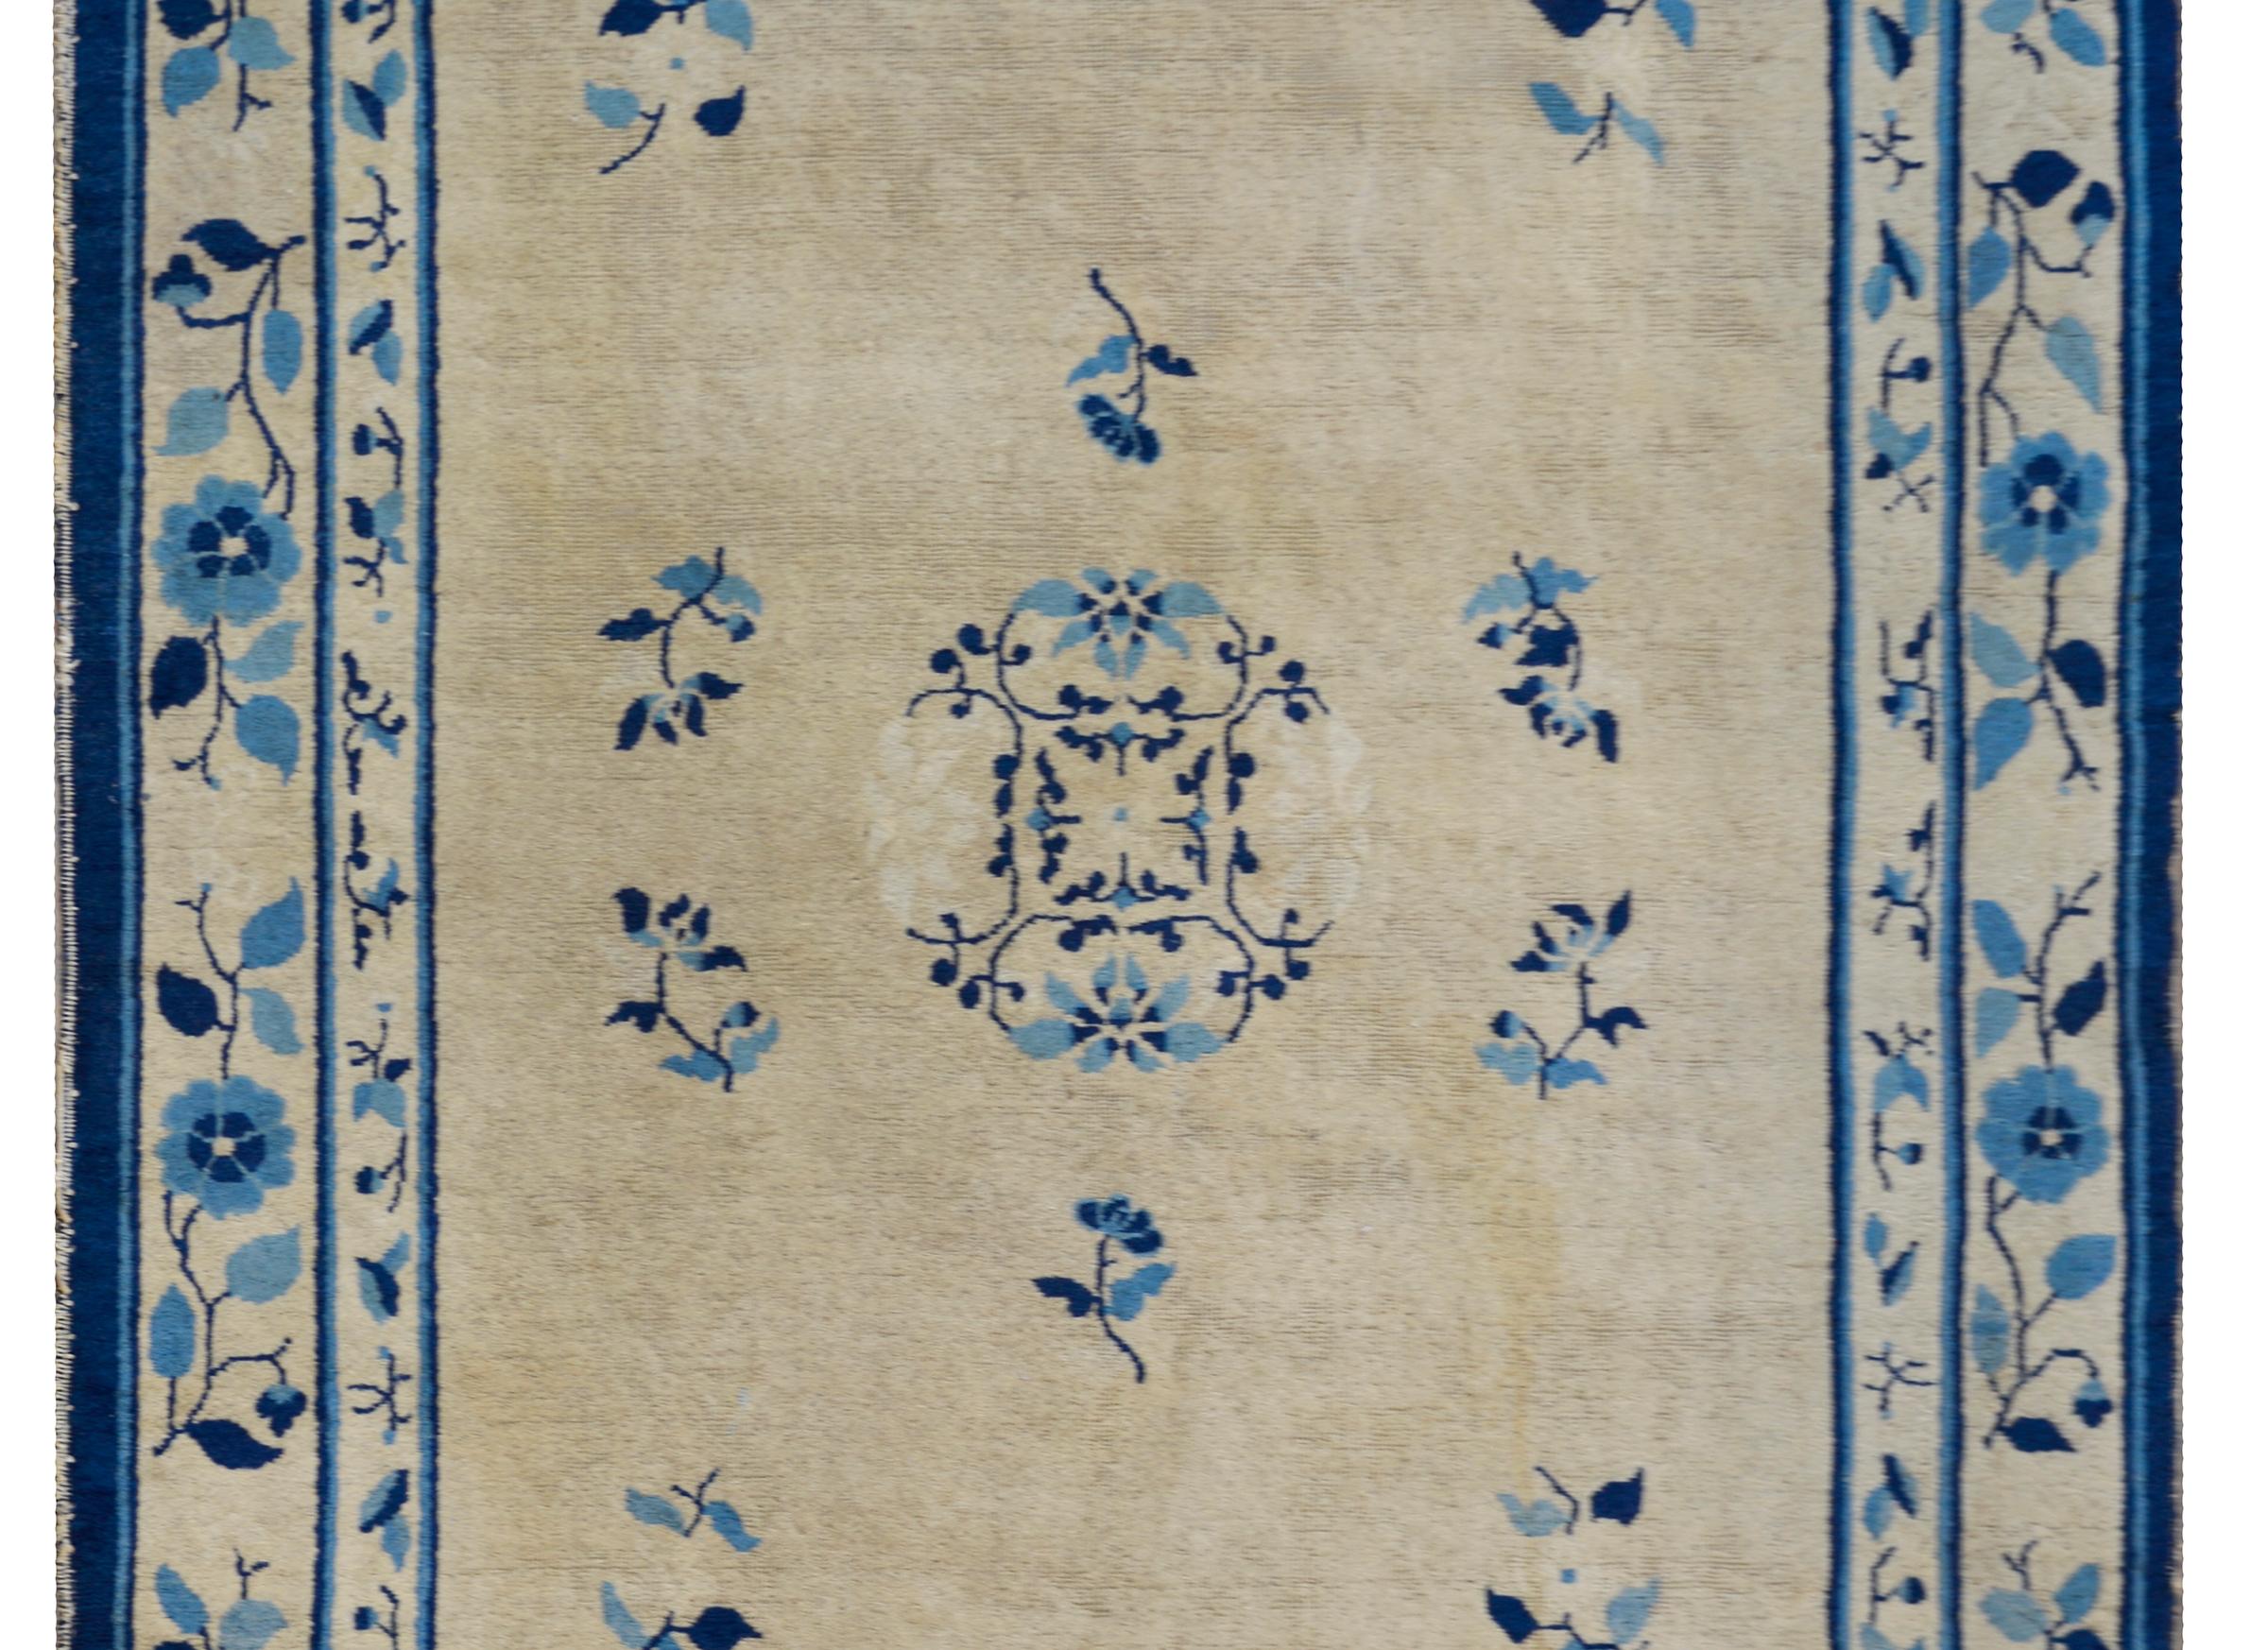 An outstanding late 19th century Chinese Peking rug woven in natural un-dyed wool with a large round chrystantmum medallion amidst a field of more chrysanthemums and peonies, all woven in light and dark indigo, and surrounded by a simple but